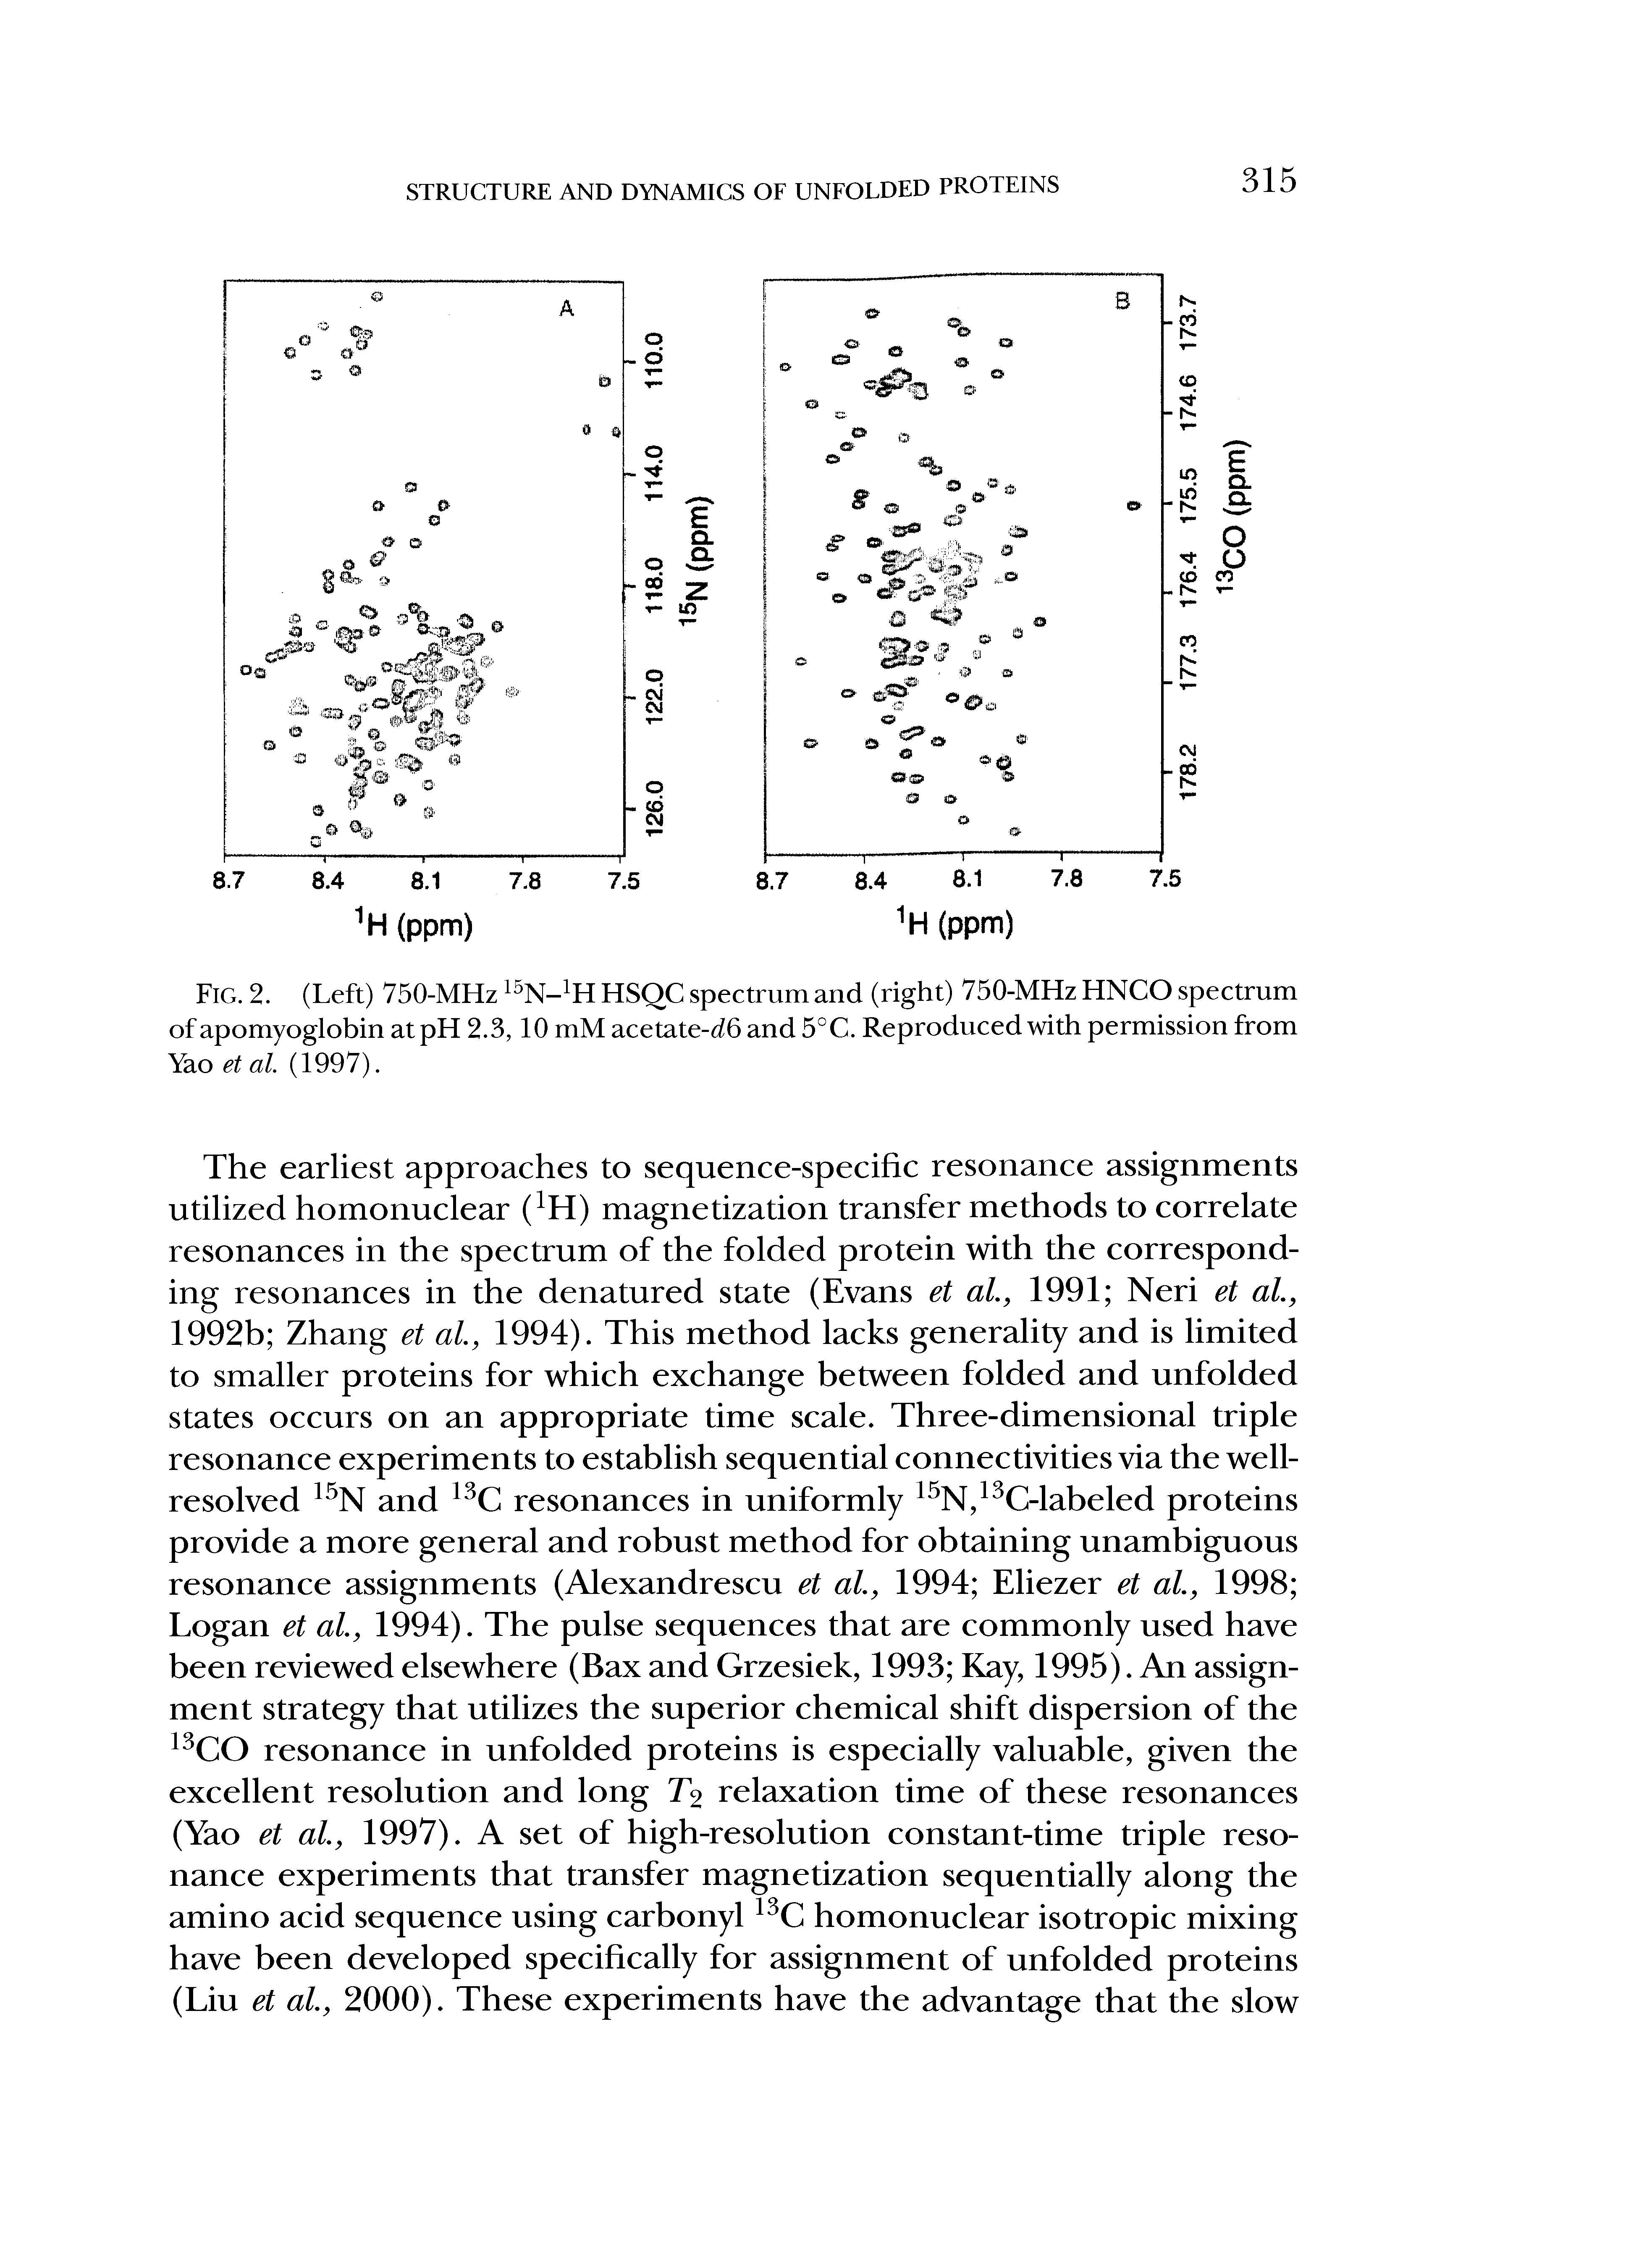 Fig. 2. (Left) 750-MHz 15N- H HSQC spectrum and (right) 750-MHz HNCO spectrum of apomyoglobin at pH 2.3,10 mM acetate-<f6 and 5°C. Reproduced with permission from Yao et al. (1997).